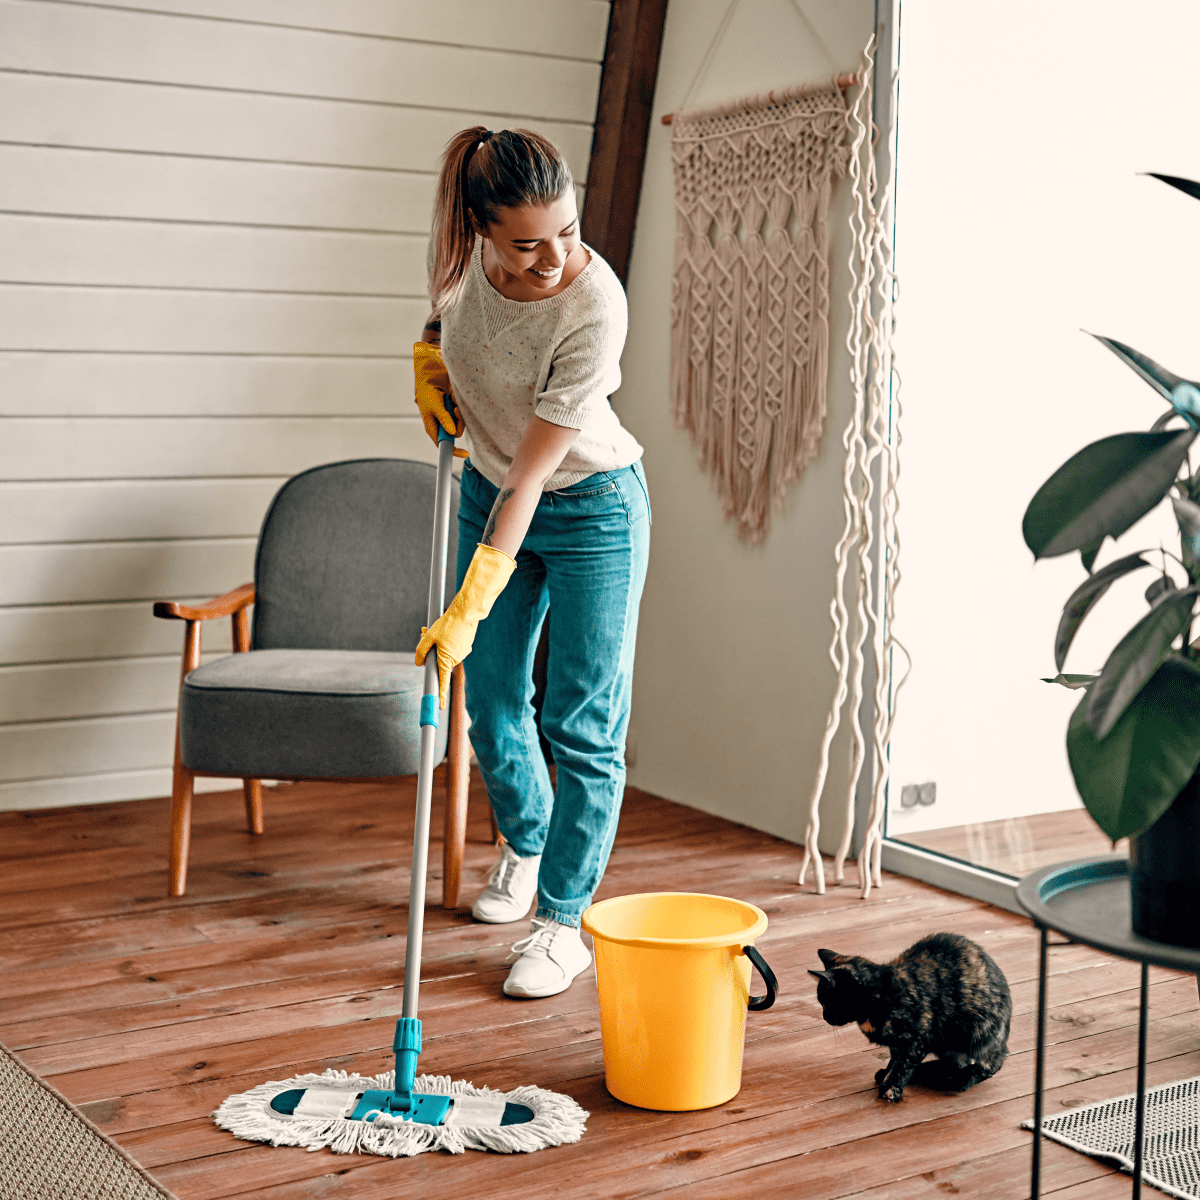 Women and cleaning - Good Housekeeping